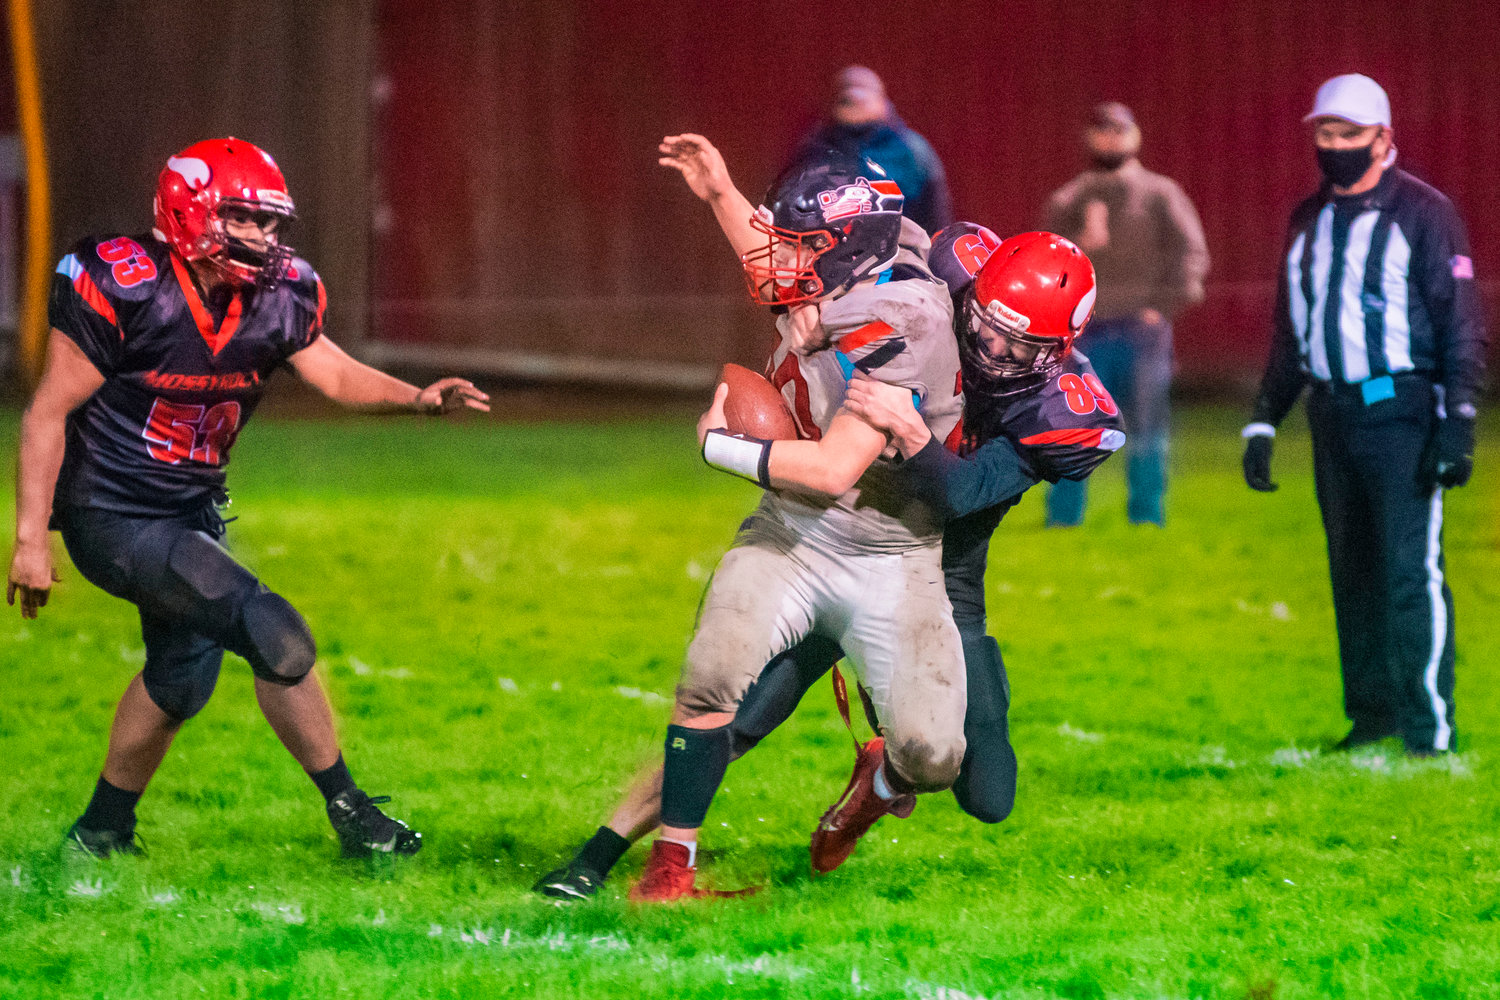 Mossyrock’s Kainen Zavodsky (89) makes a tackle during a game against Taholah Friday night.